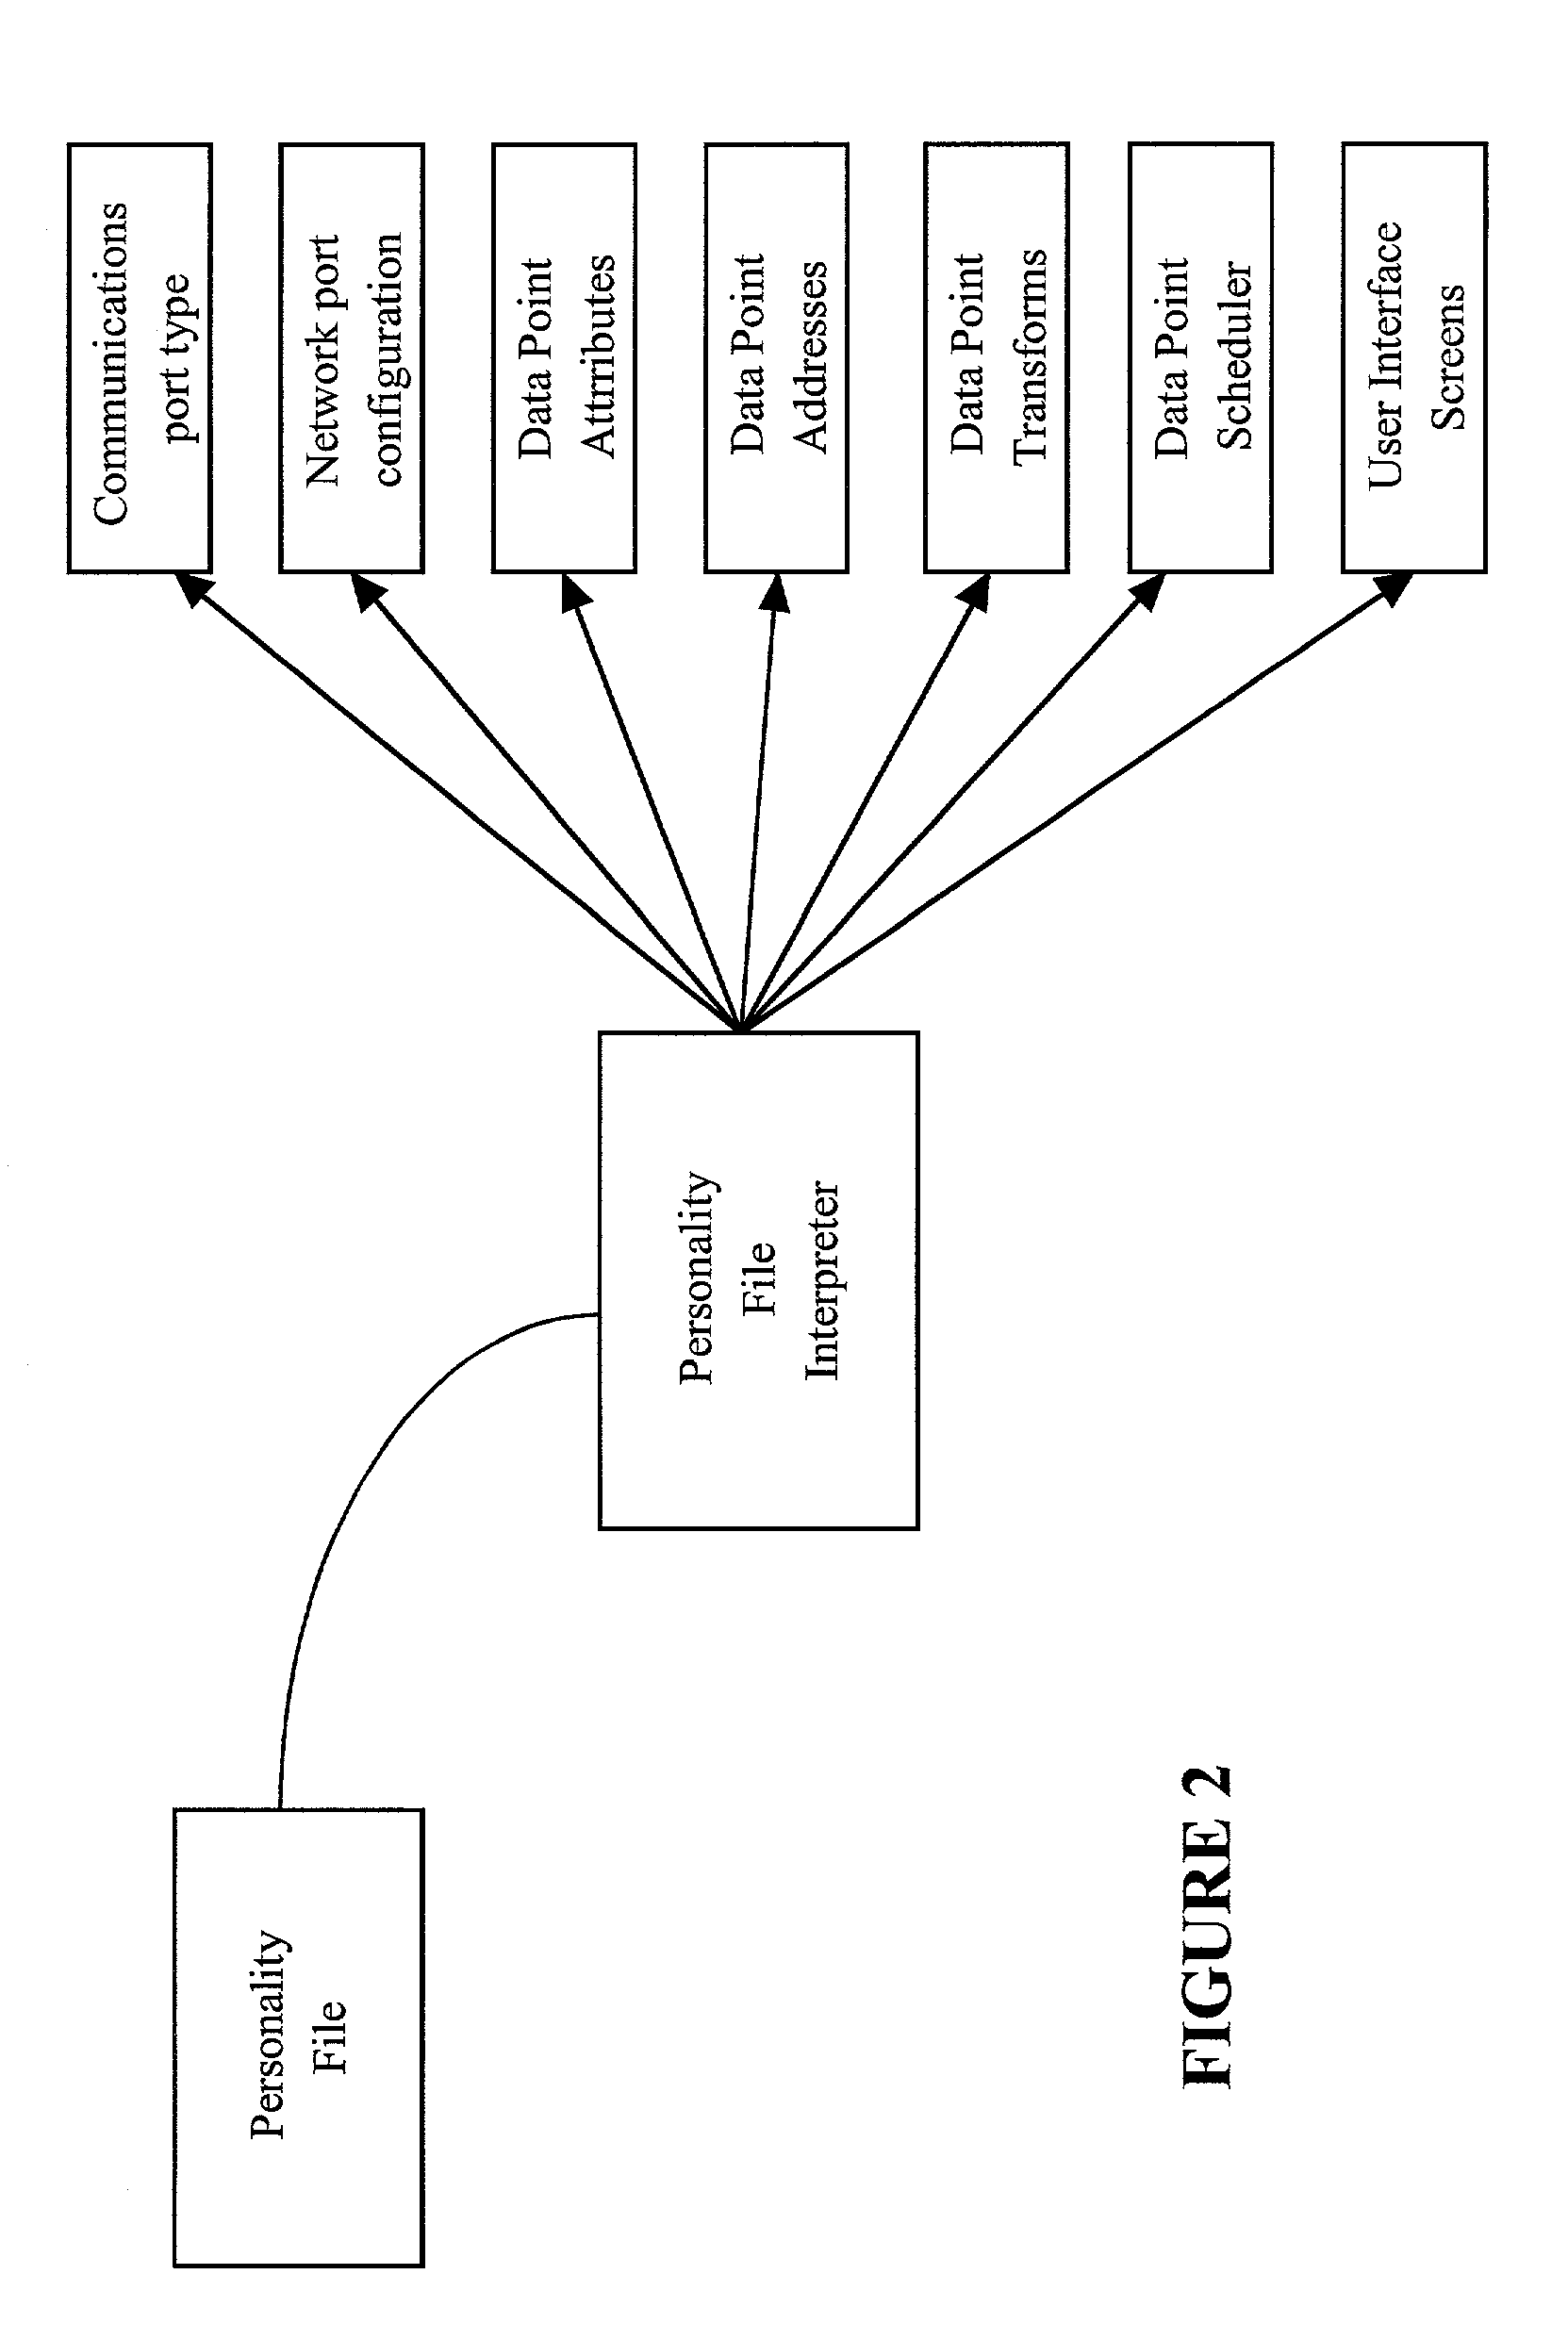 Interface for remote monitoring and control of industrial machines